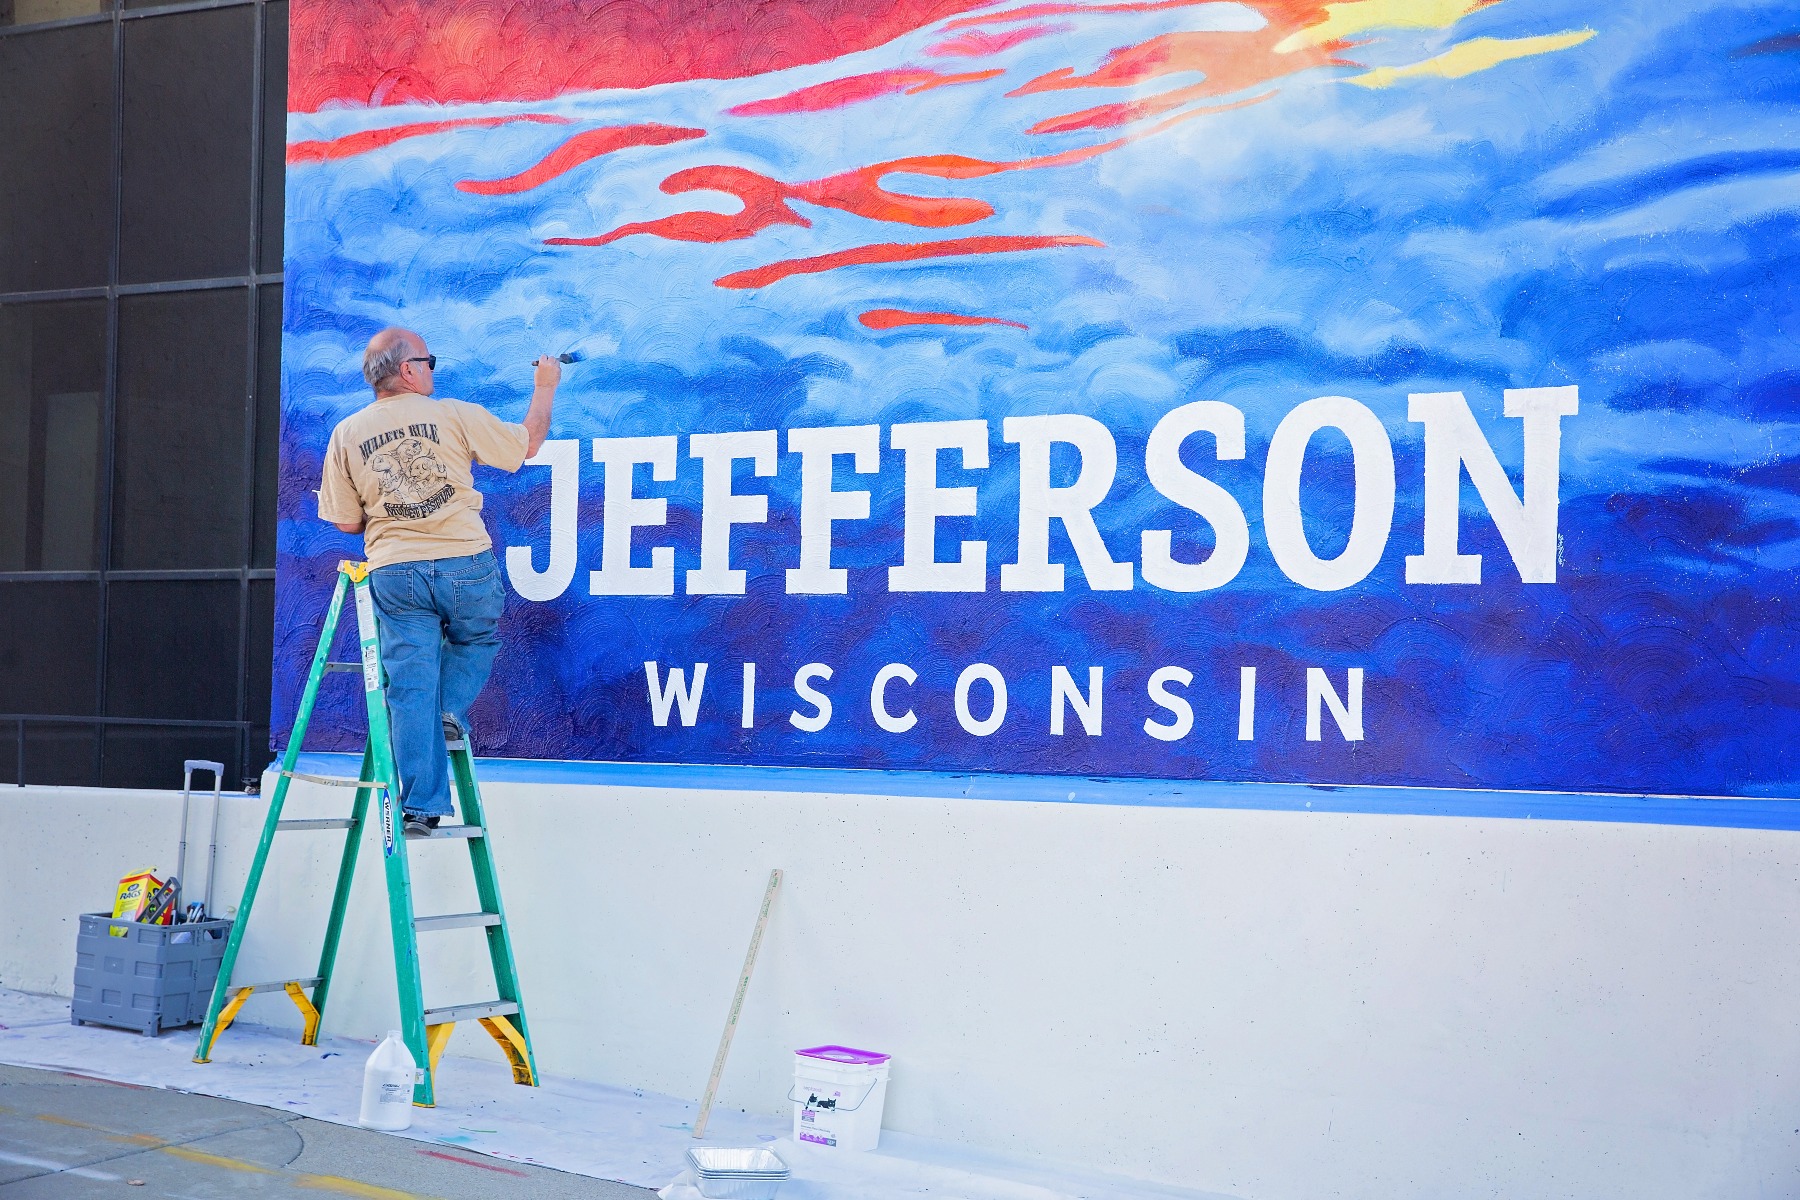 artist completes work on a mural for Jefferson Wisconsin